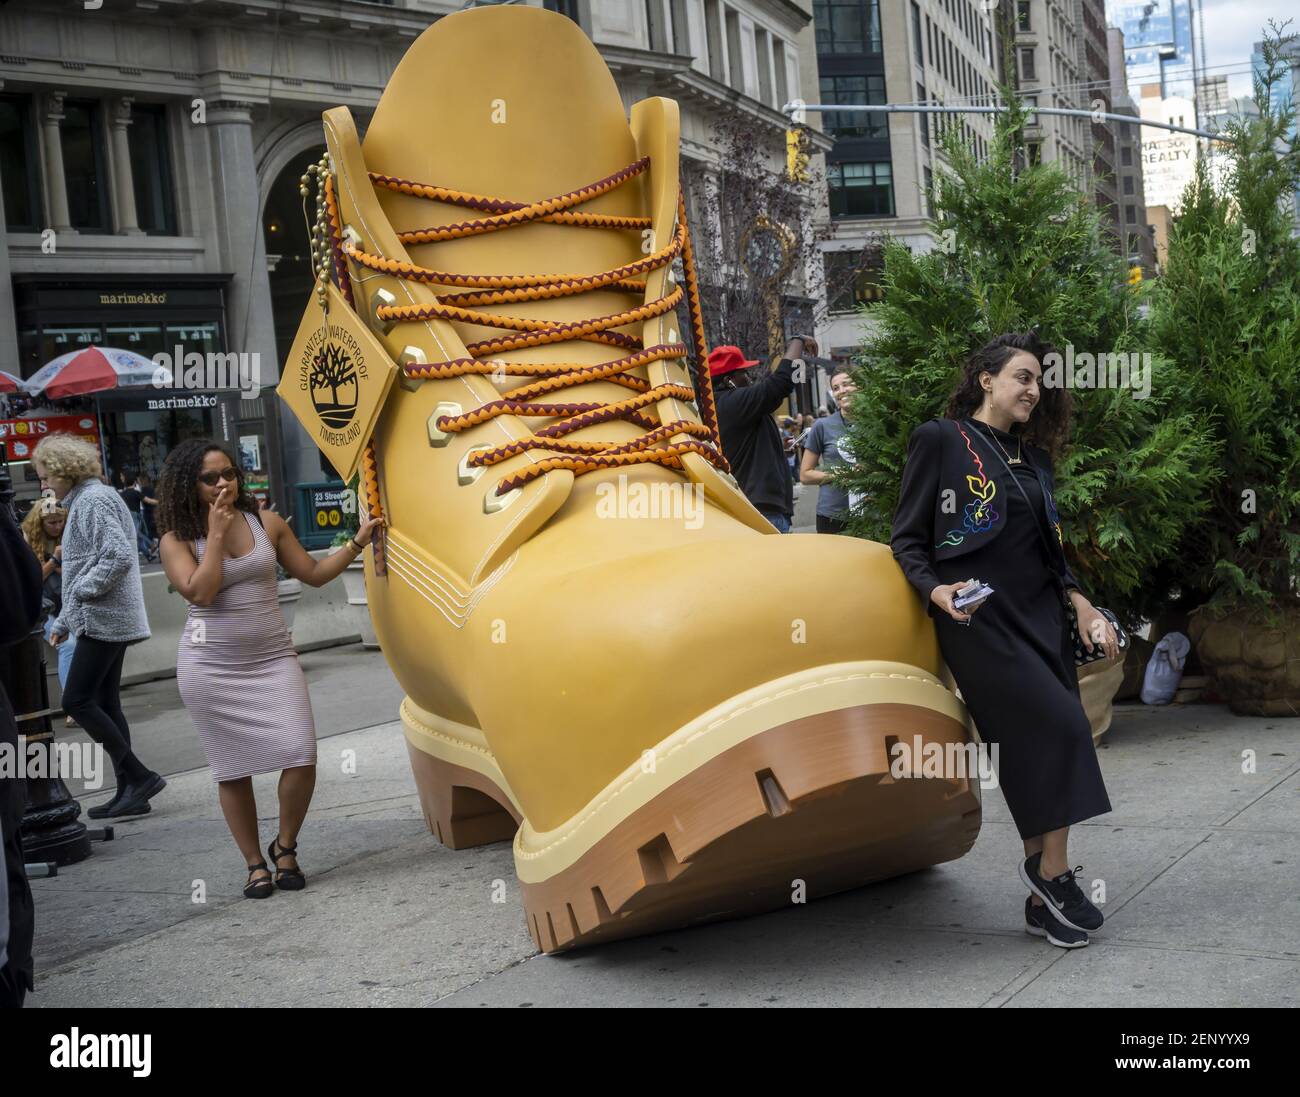 Visitors to Flatiron Plaza in New York on Friday, October 4, 2019  participate in a branding event for VF Corp.'s Timberland boots and apparel  brand. By taking a pledge to support the